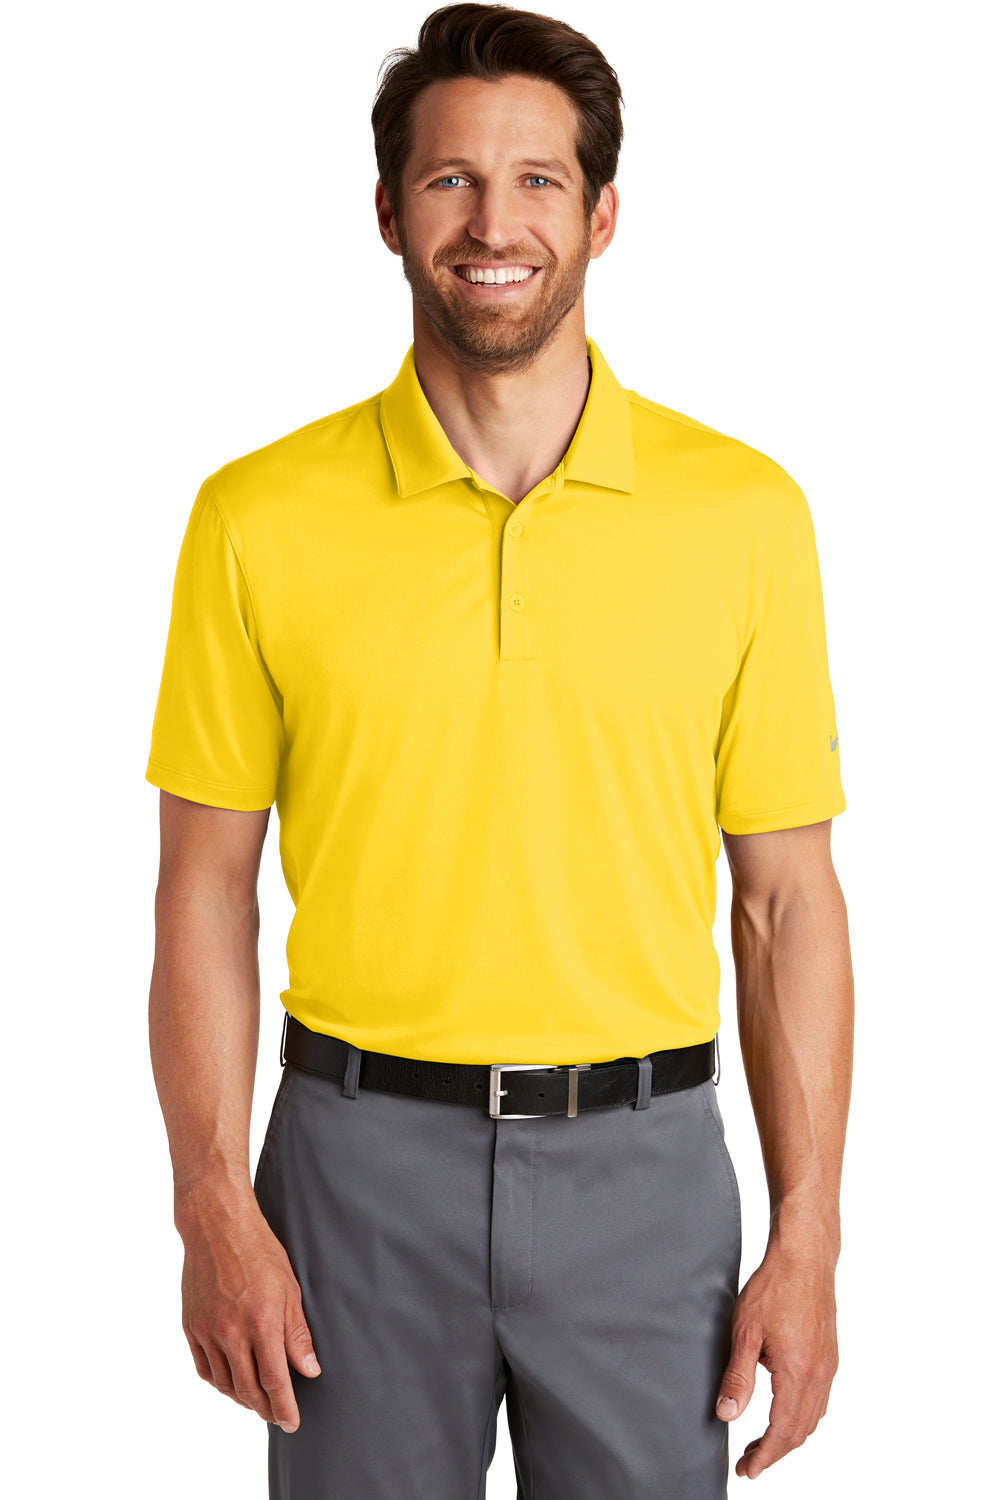 Nike 883681 Mens Legacy Dri-Fit Moisture Wicking Short Sleeve Polo Shirt Yellow Front